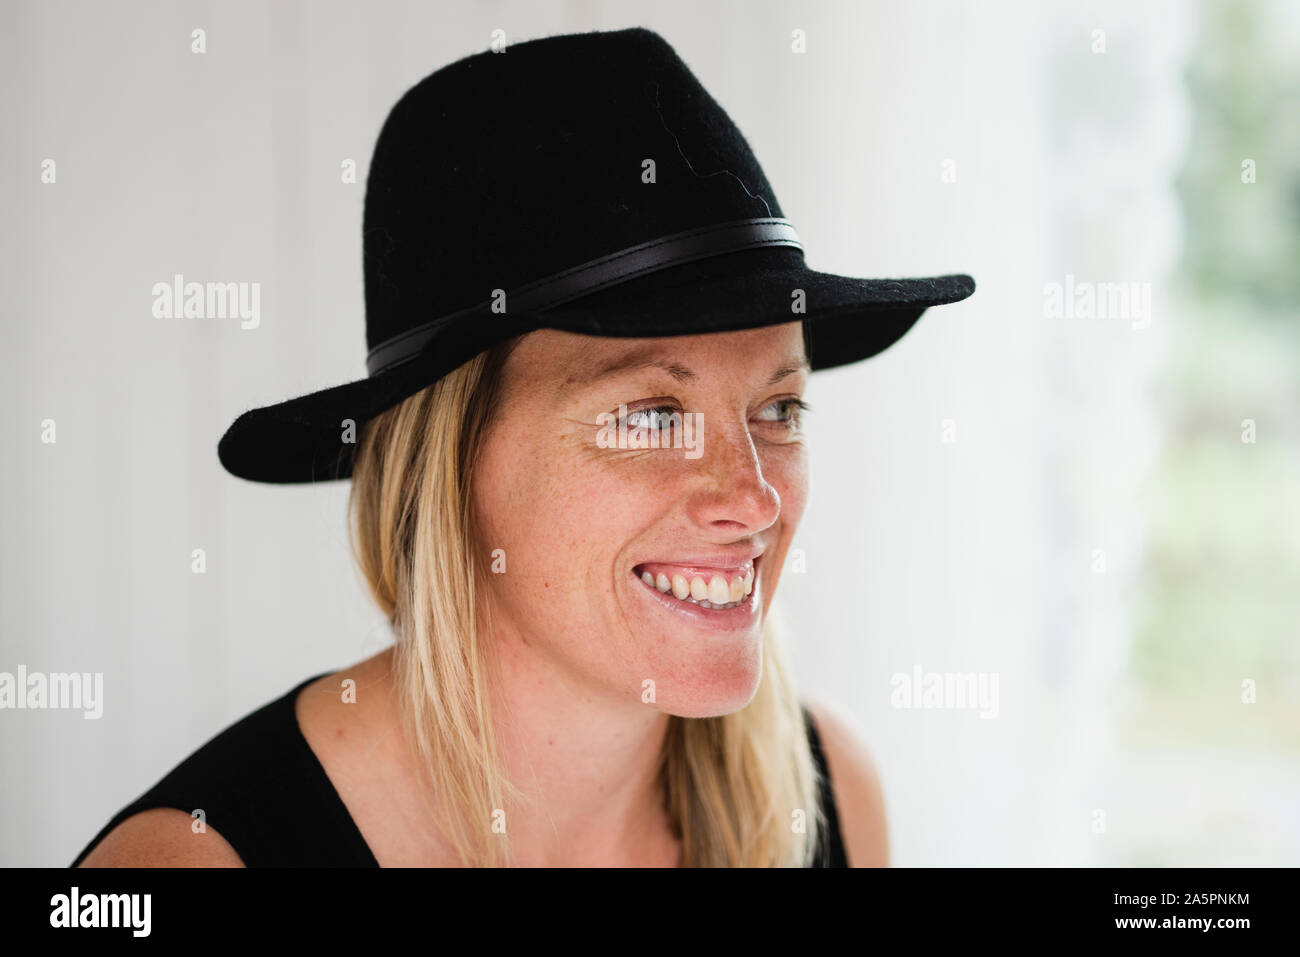 Smiling blond woman wearing hat Banque D'Images